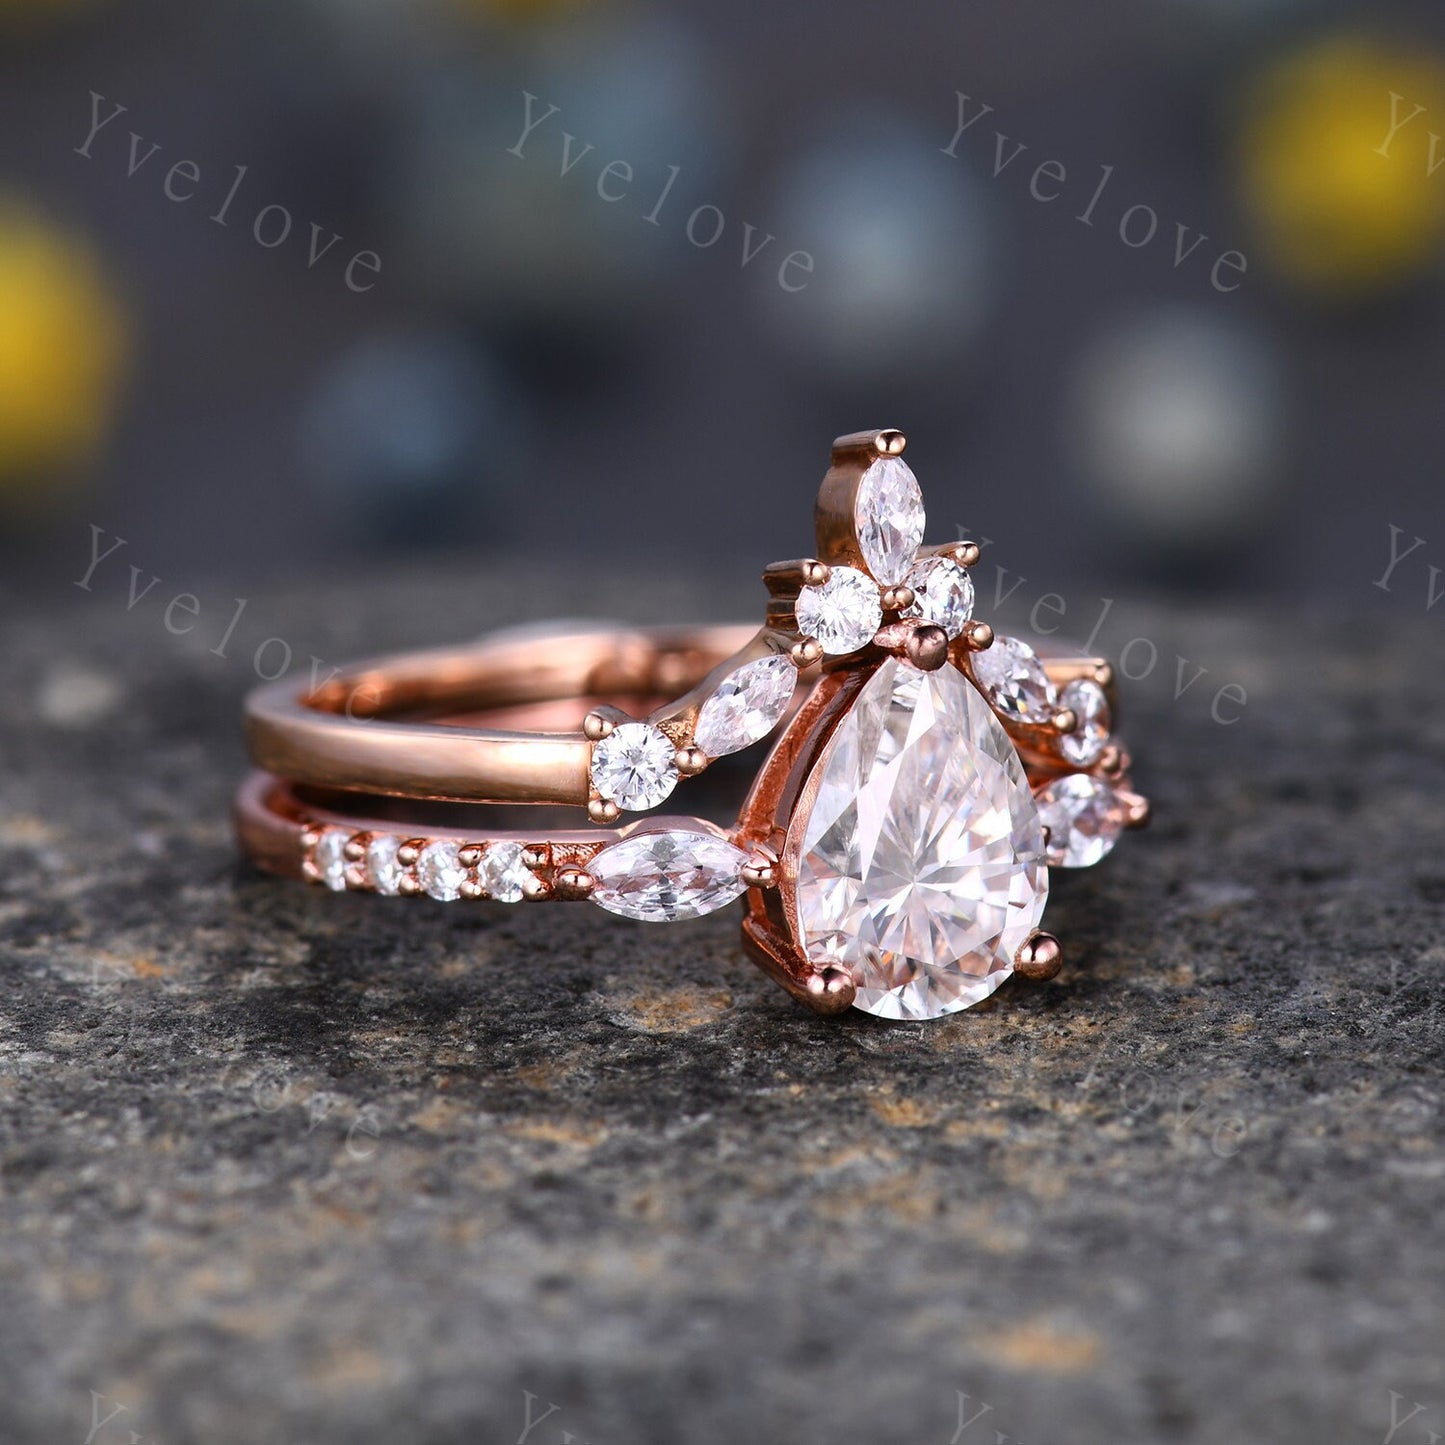 1.5ct Tear Drop Wedding Ring,Pear Shape Moissanite Engagement Ring,Marquise cut Moissanite Rose Gold Ring For Women,Anniversary Ring Gift